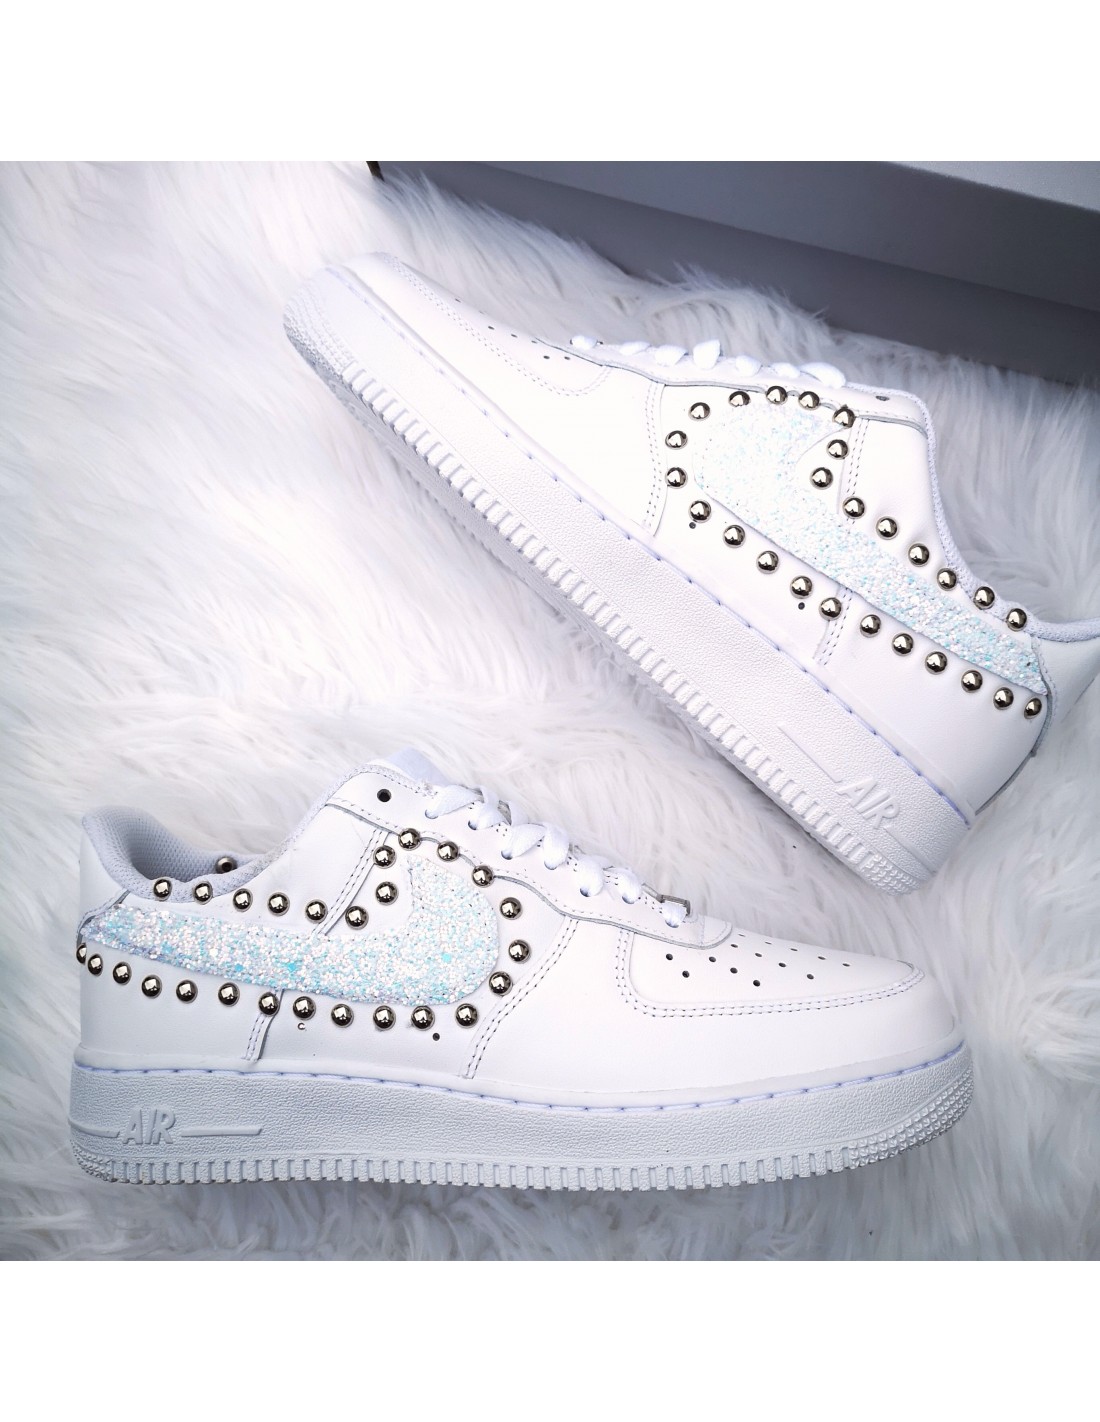 Nike Air Force One AF1 baffo Glitter Frozen e Sfere Argento